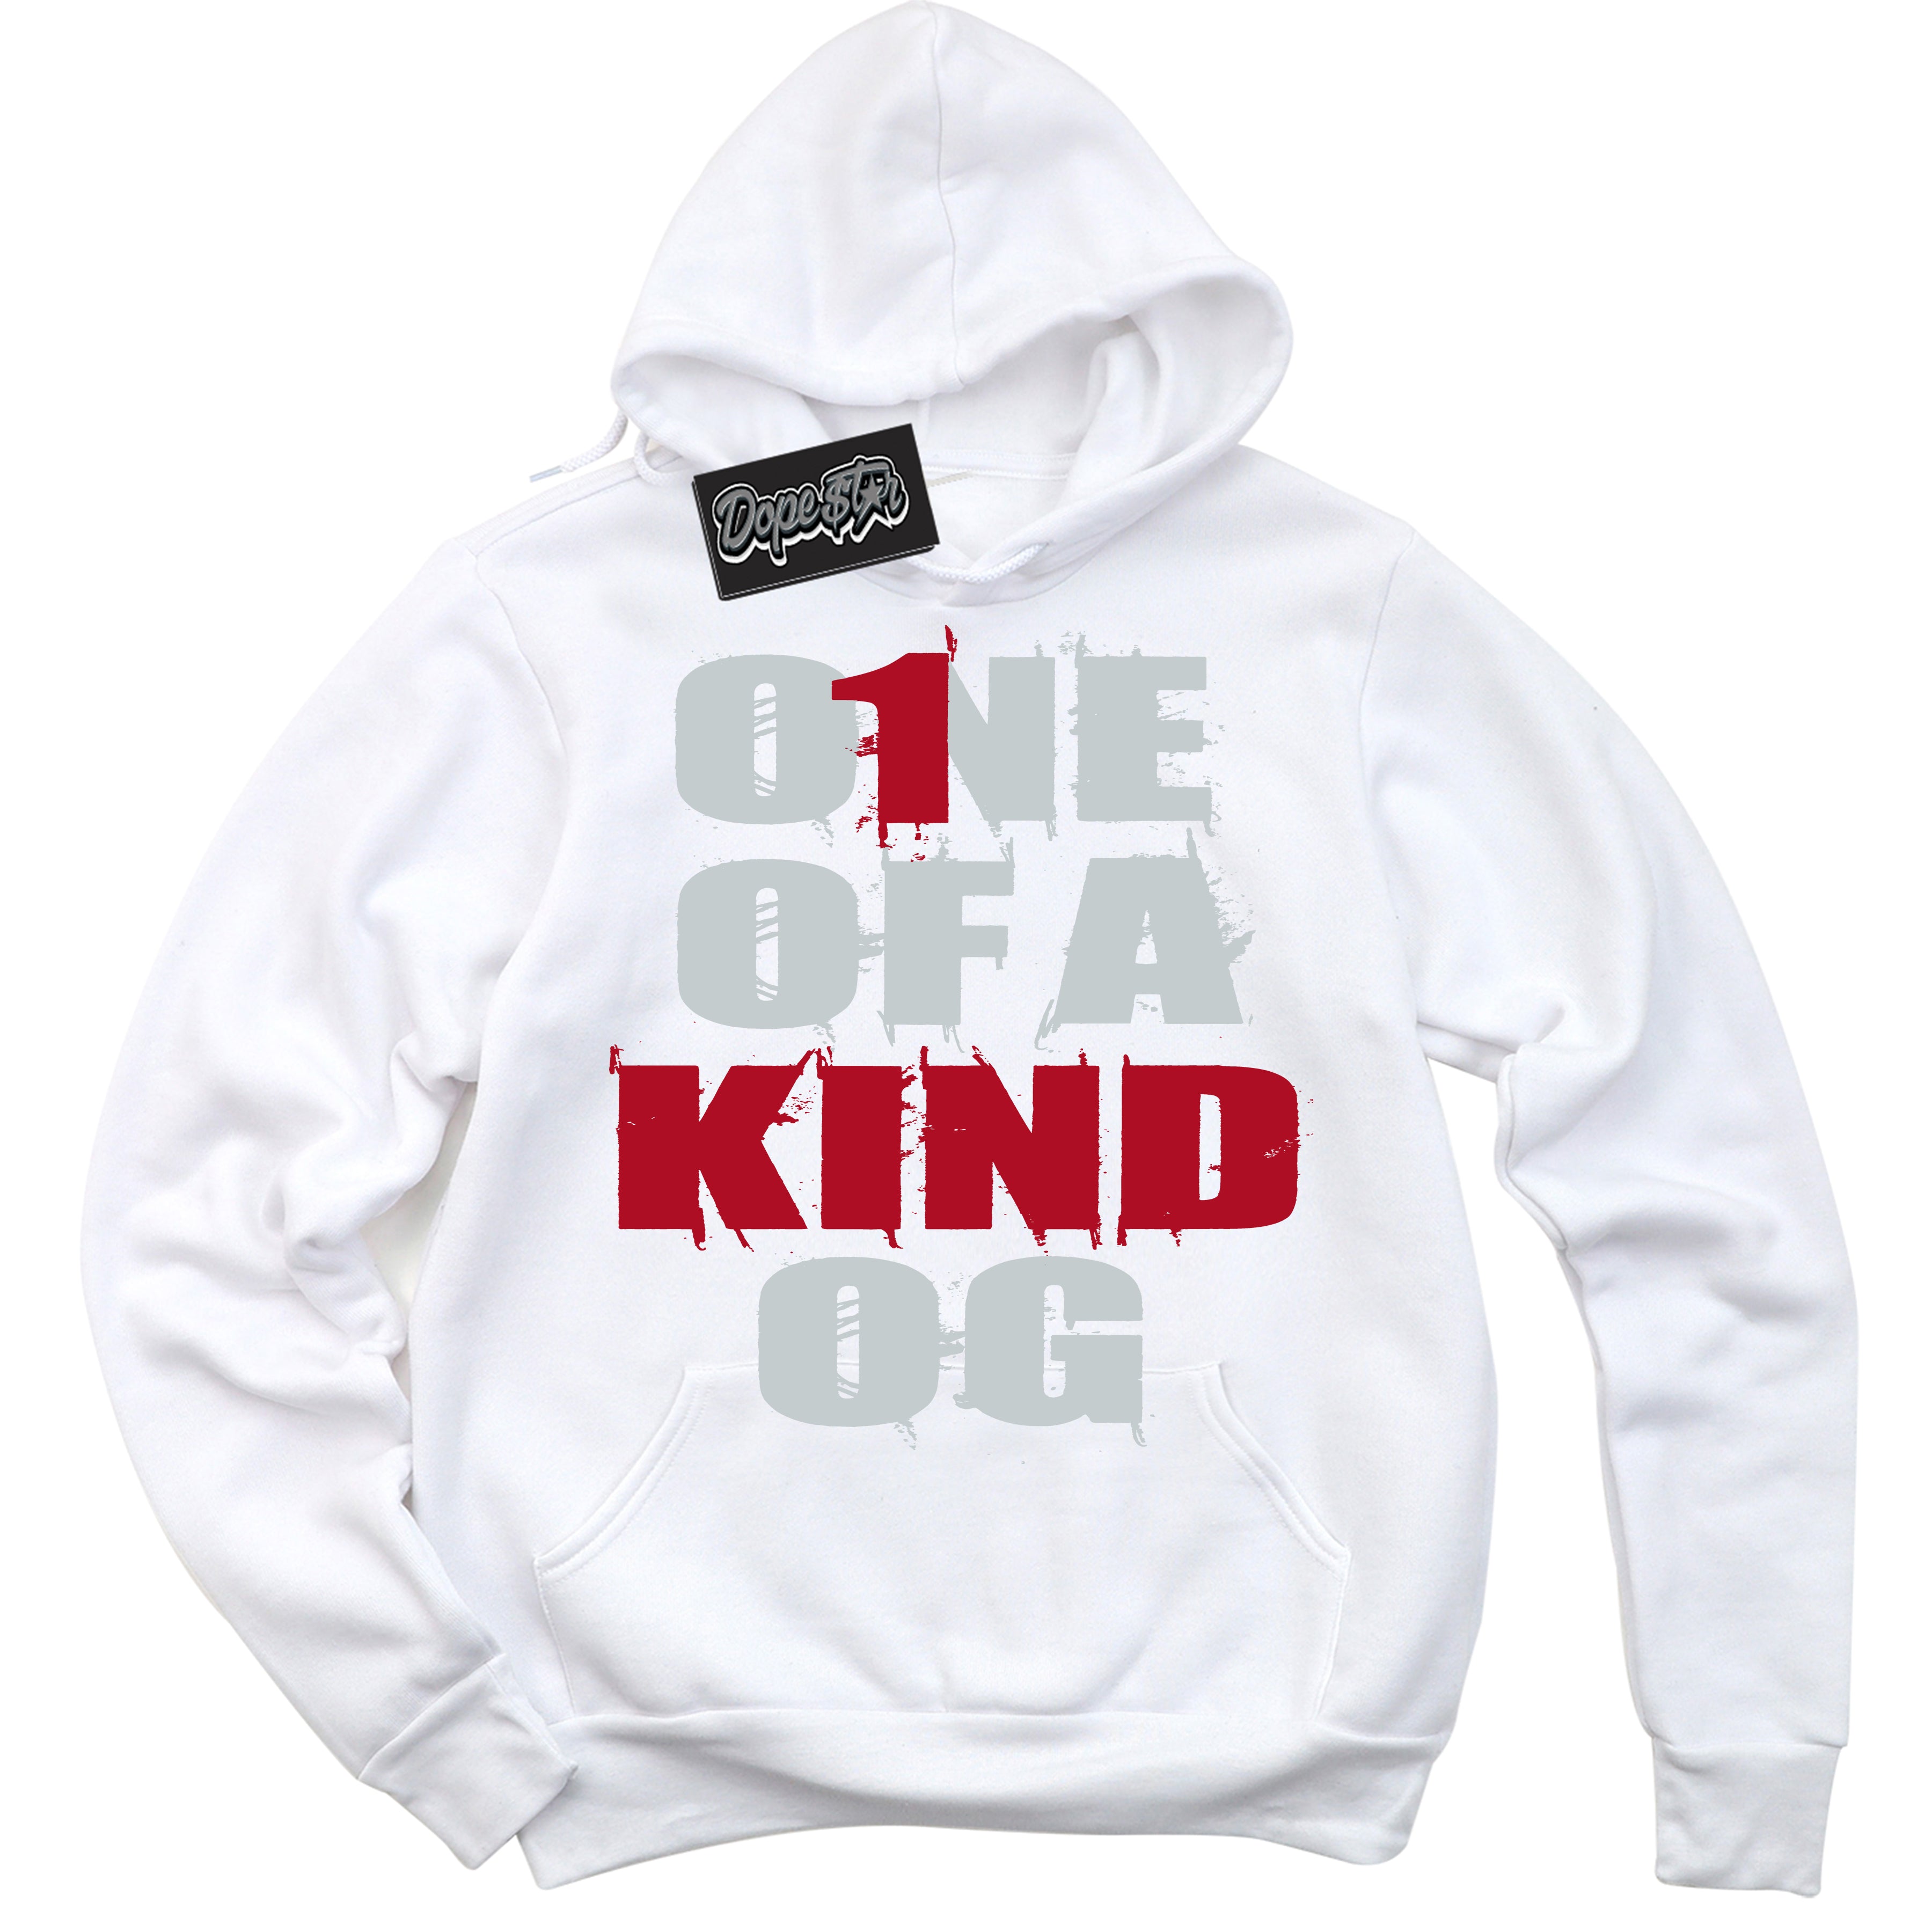 Cool White Hoodie with “ One Of A Kind ”  design that Perfectly Matches Reverse Ultraman Sneakers.